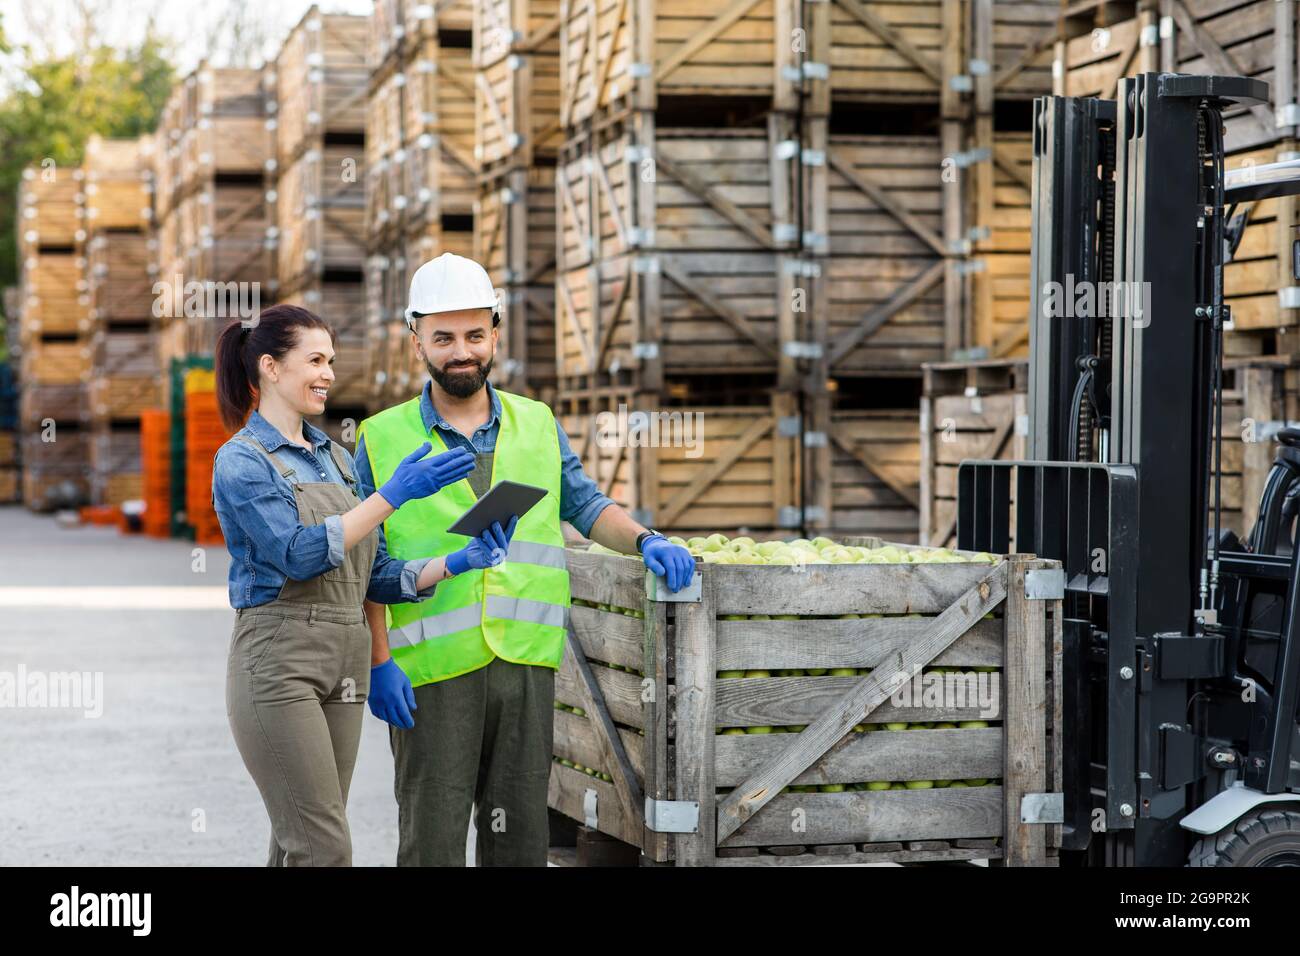 Warehouse management, loading fruit for dispatch and storage, production and sale Stock Photo